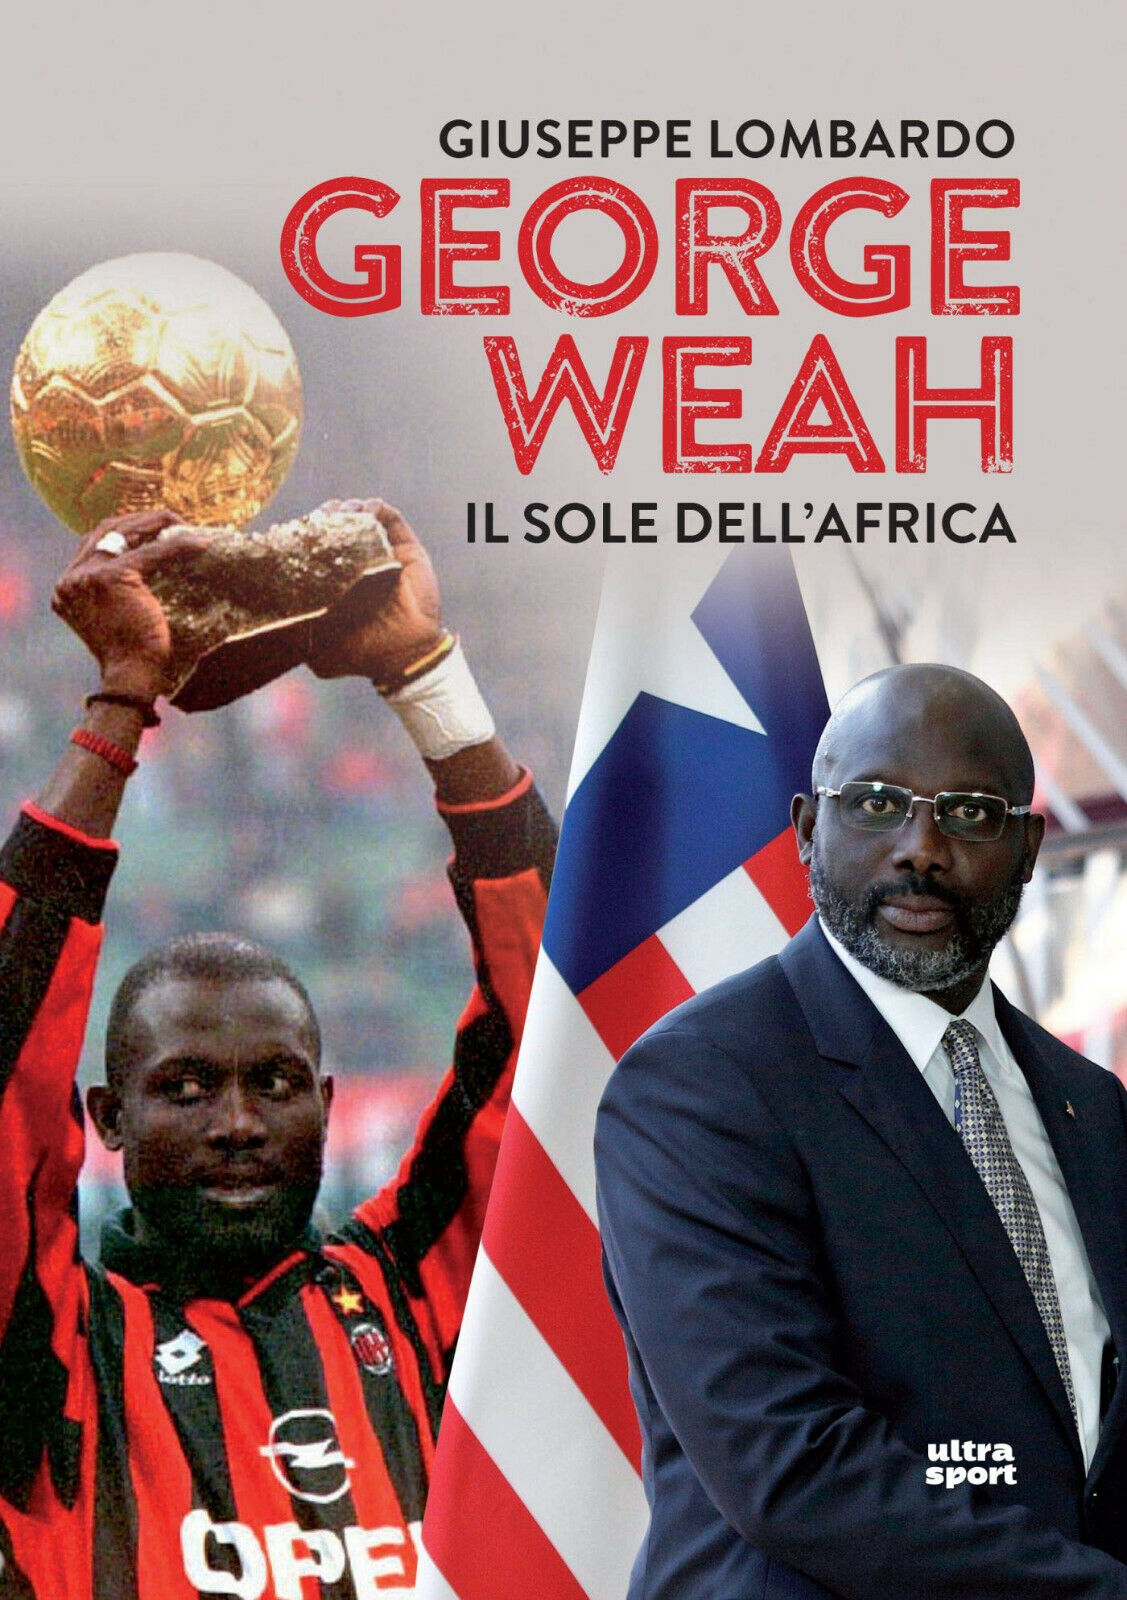 George Weah: Il sole dell'Africa - Giuseppe Lombardo - Ultra - 2018